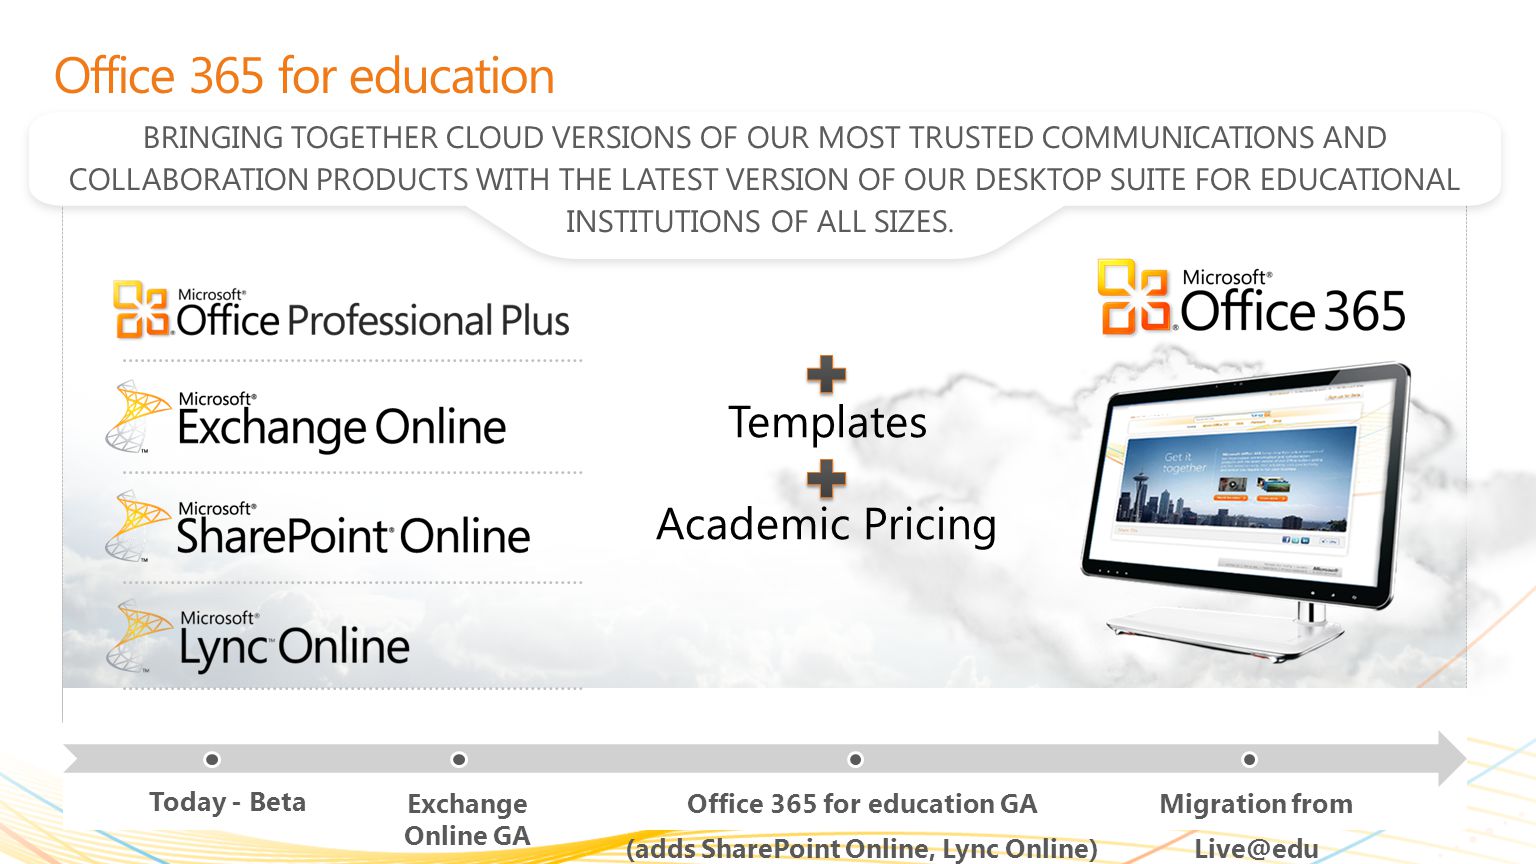 | Copyright© 2010 Microsoft Corporation Office 365 for education BRINGING TOGETHER CLOUD VERSIONS OF OUR MOST TRUSTED COMMUNICATIONS AND COLLABORATION PRODUCTS WITH THE LATEST VERSION OF OUR DESKTOP SUITE FOR EDUCATIONAL INSTITUTIONS OF ALL SIZES.